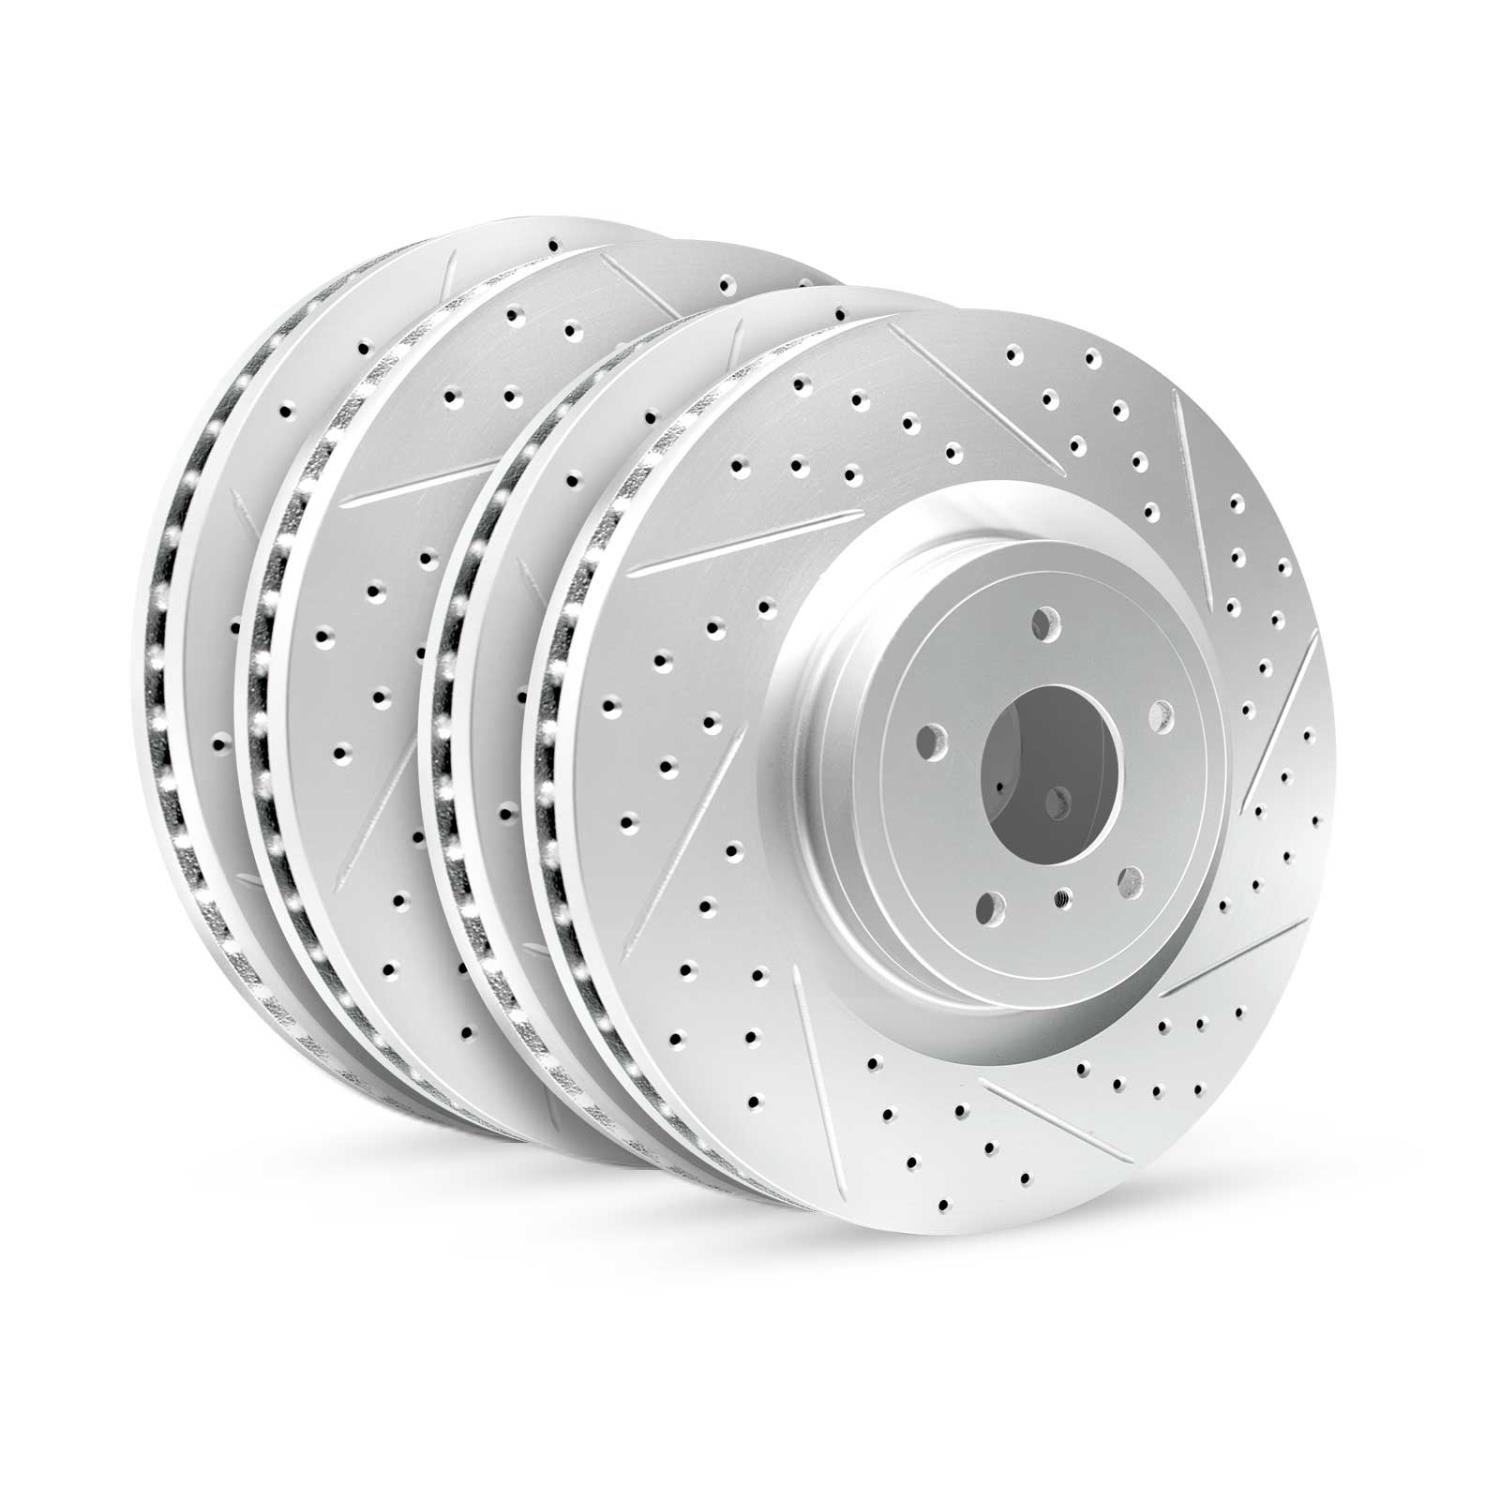 GEO-Carbon Drilled/Slotted Rotors, 1995-1998 BMW, Position: Front/Rear